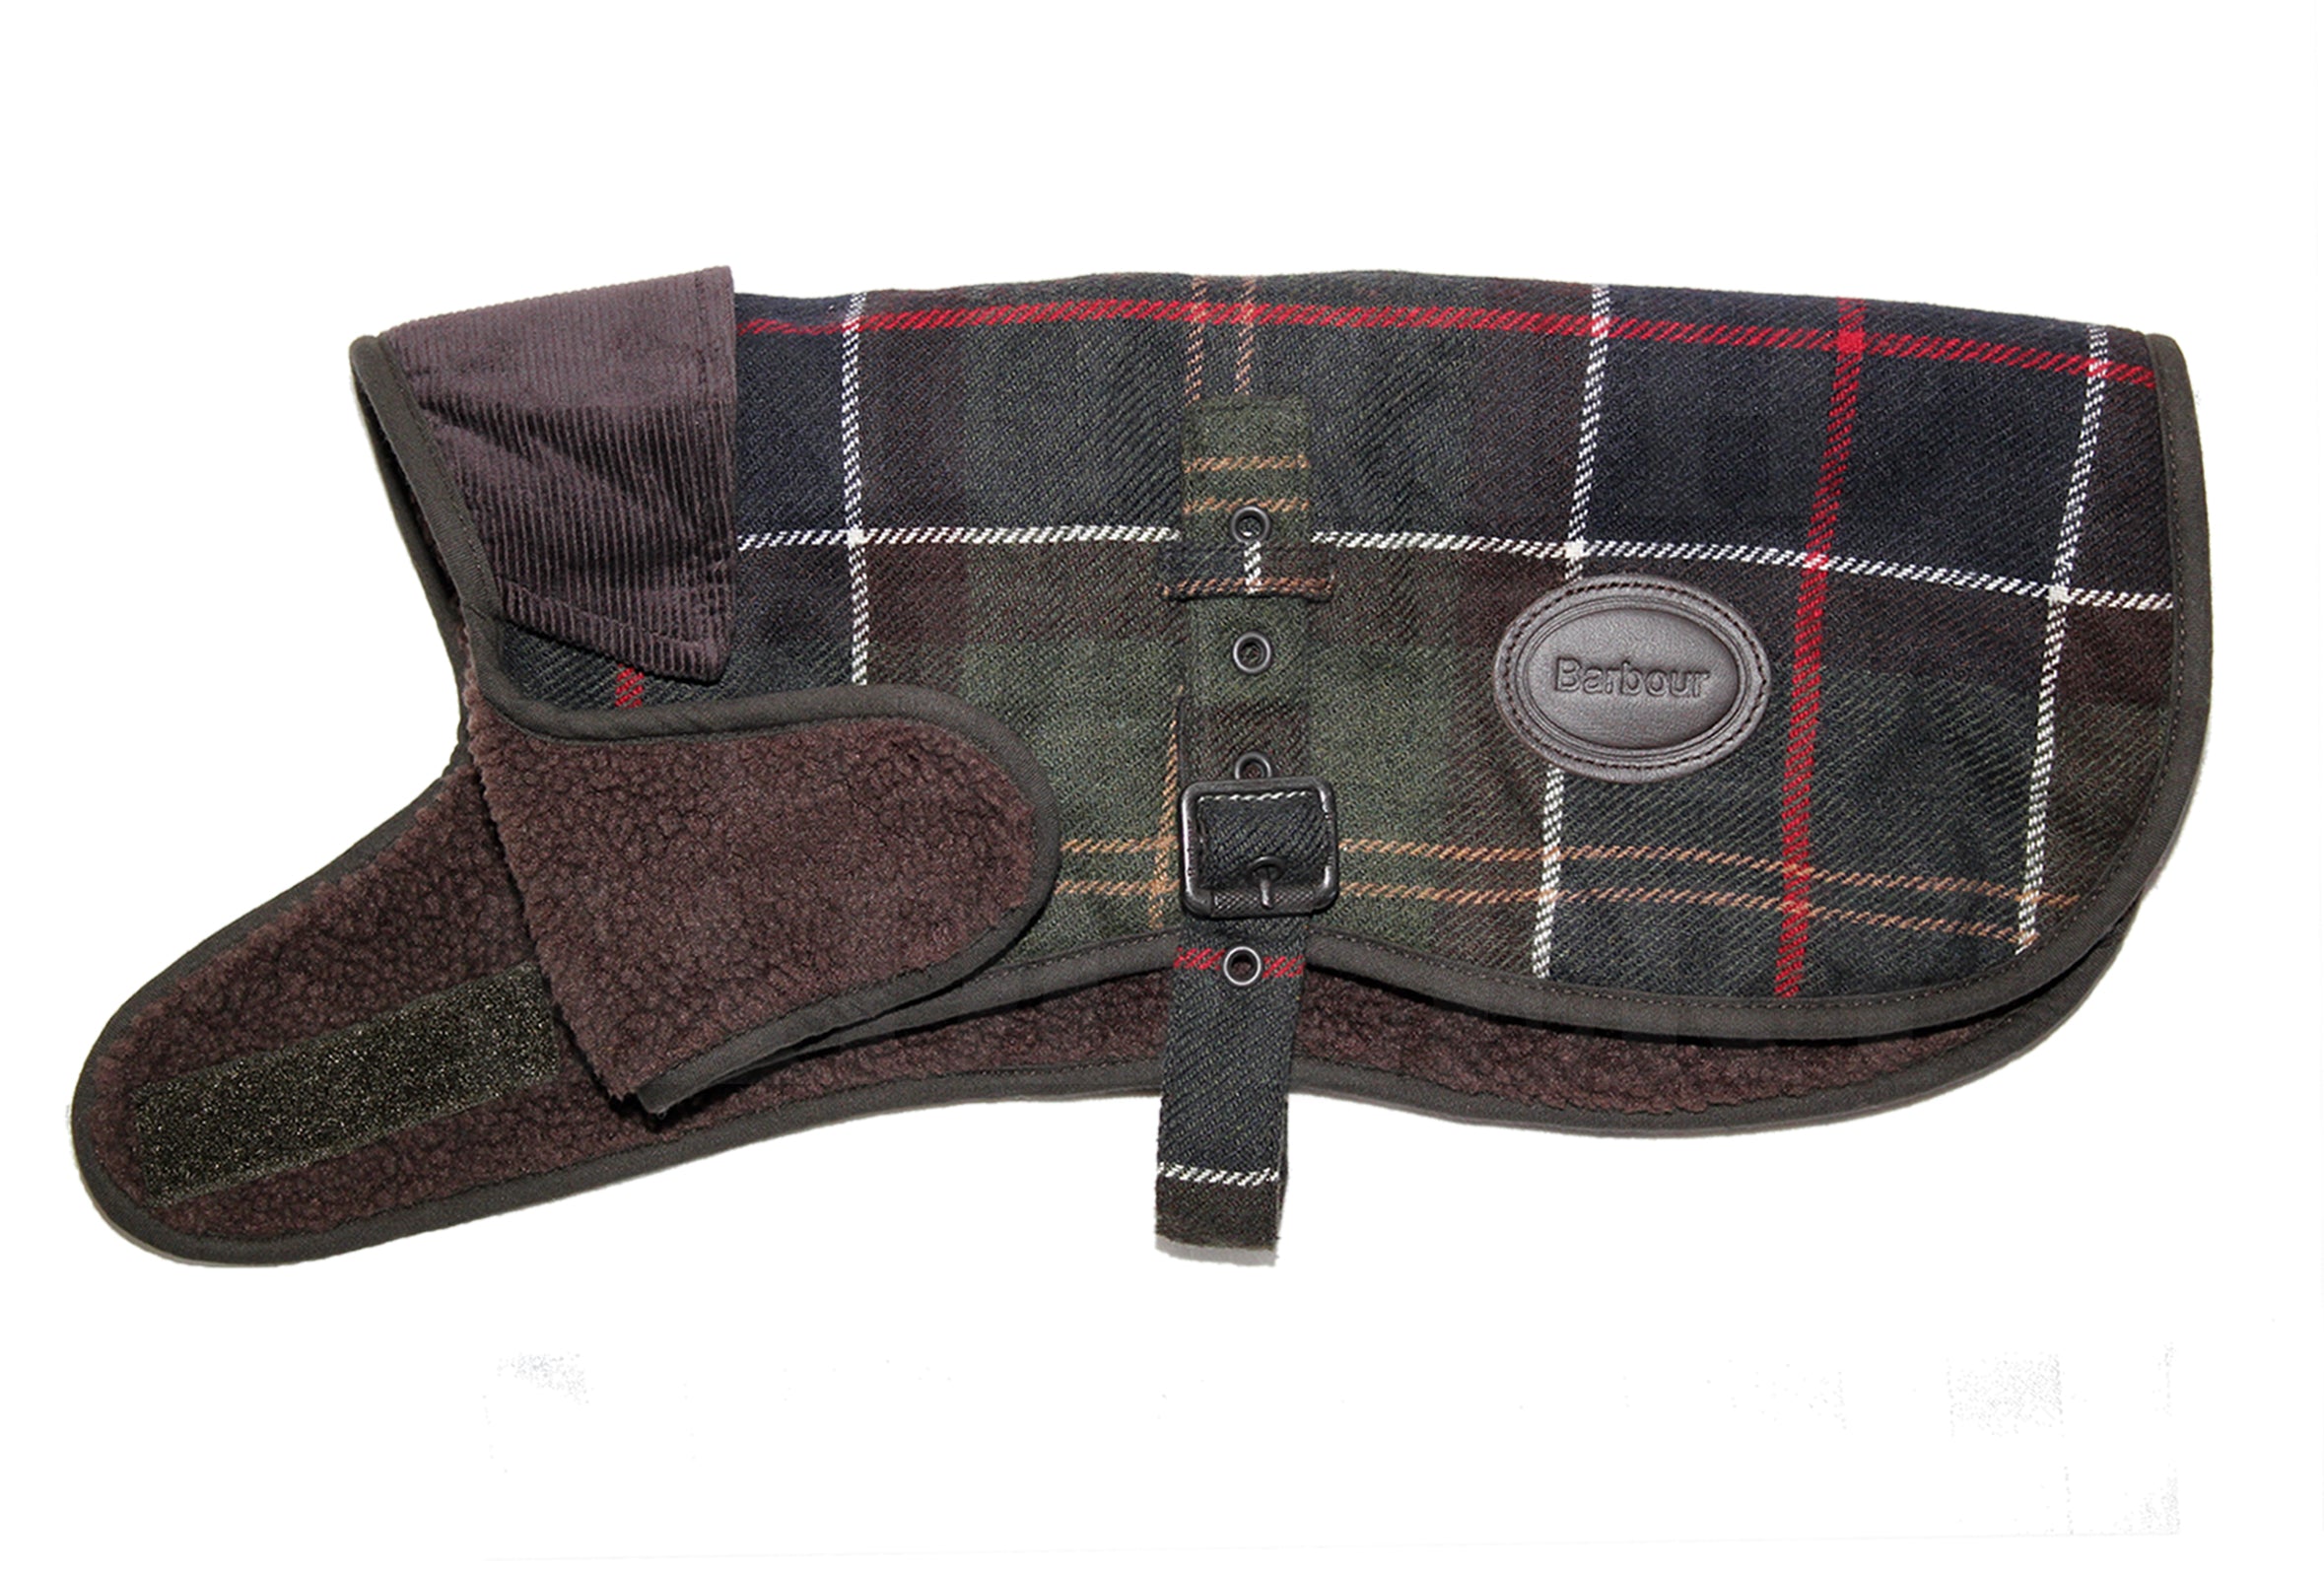 Barbour Wool Touch Fleece Lined Dog Coat - North Shore Saddlery